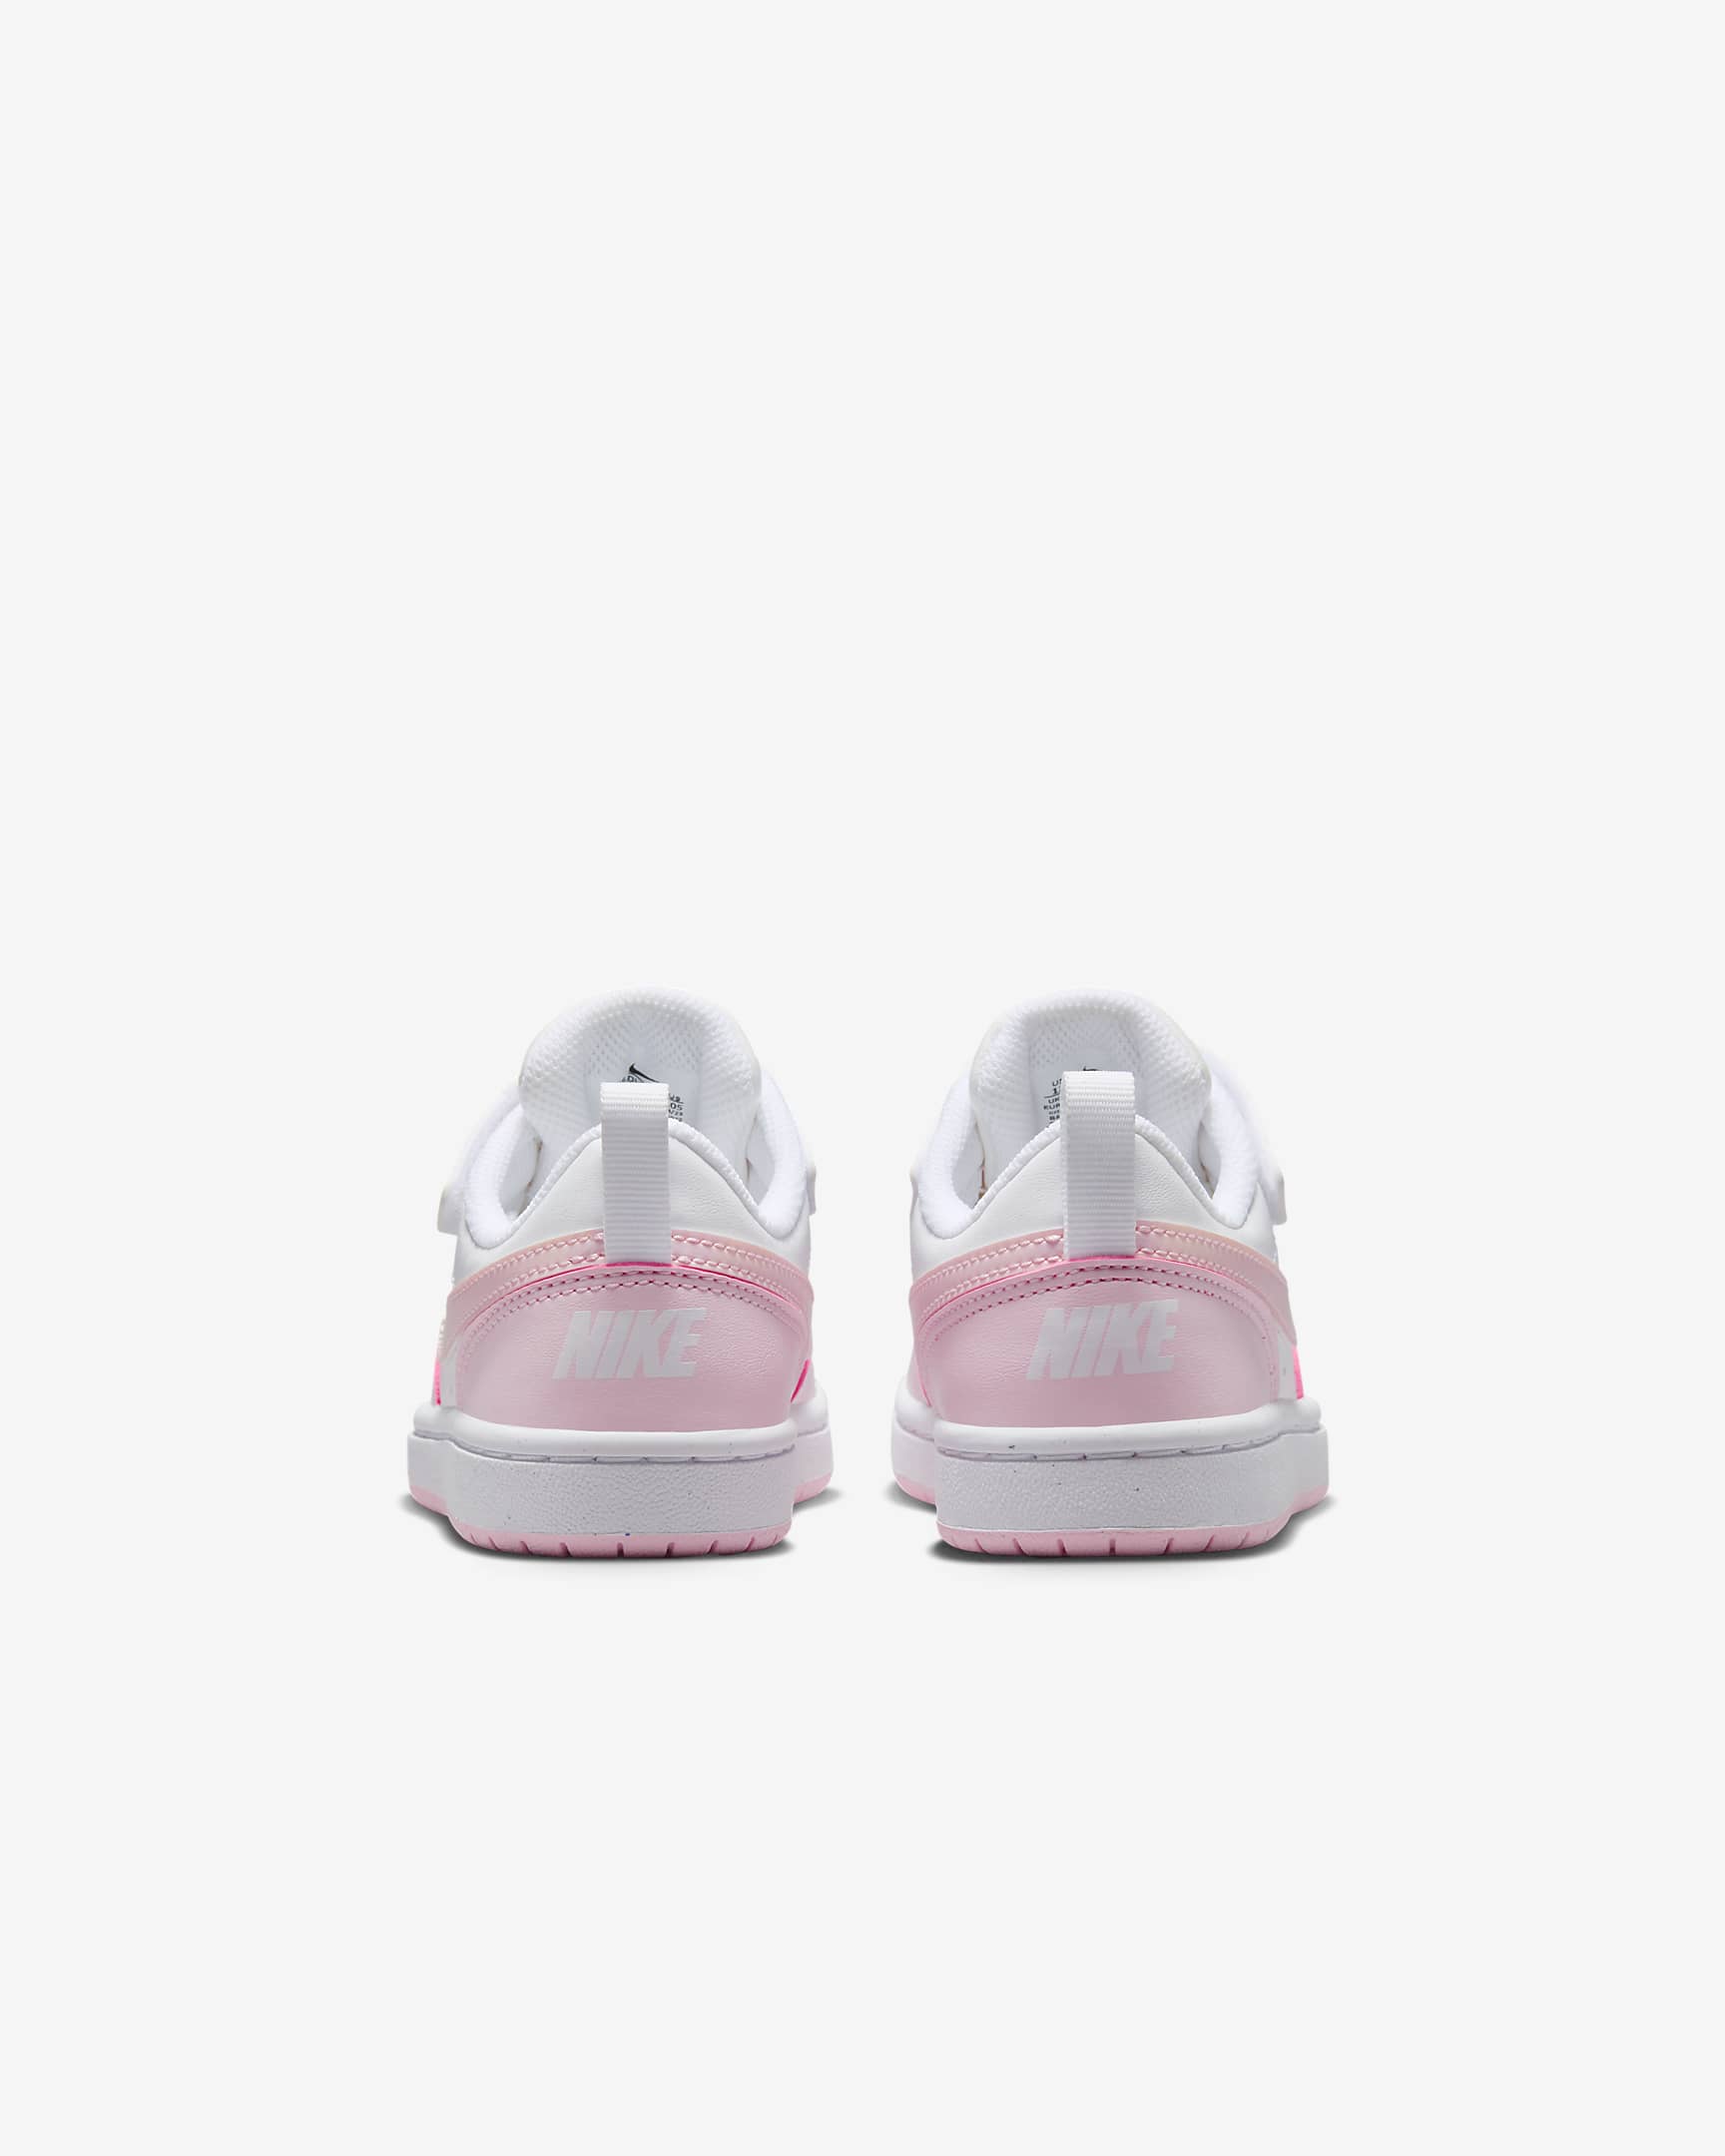 Nike Court Borough Low Recraft Younger Kids' Shoes - White/Pink Foam